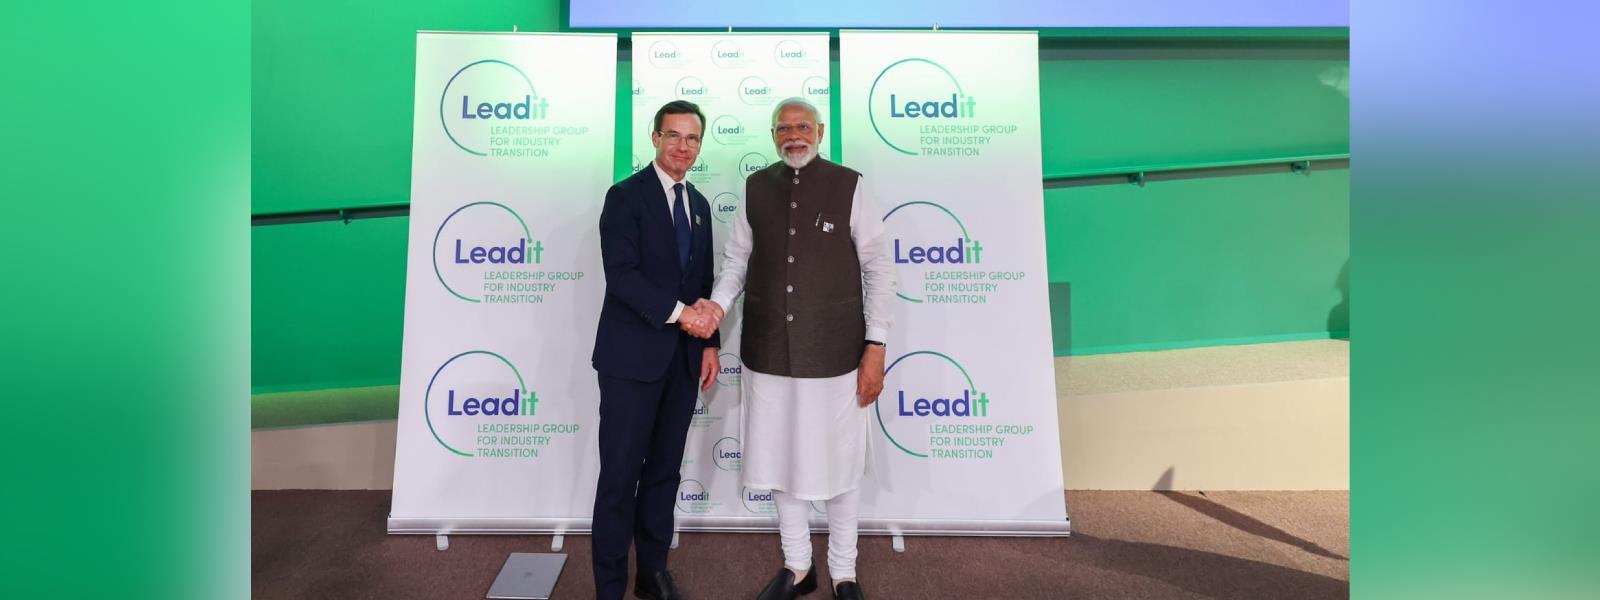 Prime Minister Shri Narendra Modi together with H.E. Mr. Ulf Kristersson, Prime Minister of Sweden, co-launched the Phase-II of the Leadership Group for Industry Transition (LeadIT 2.0) at COP-28 in Dubai